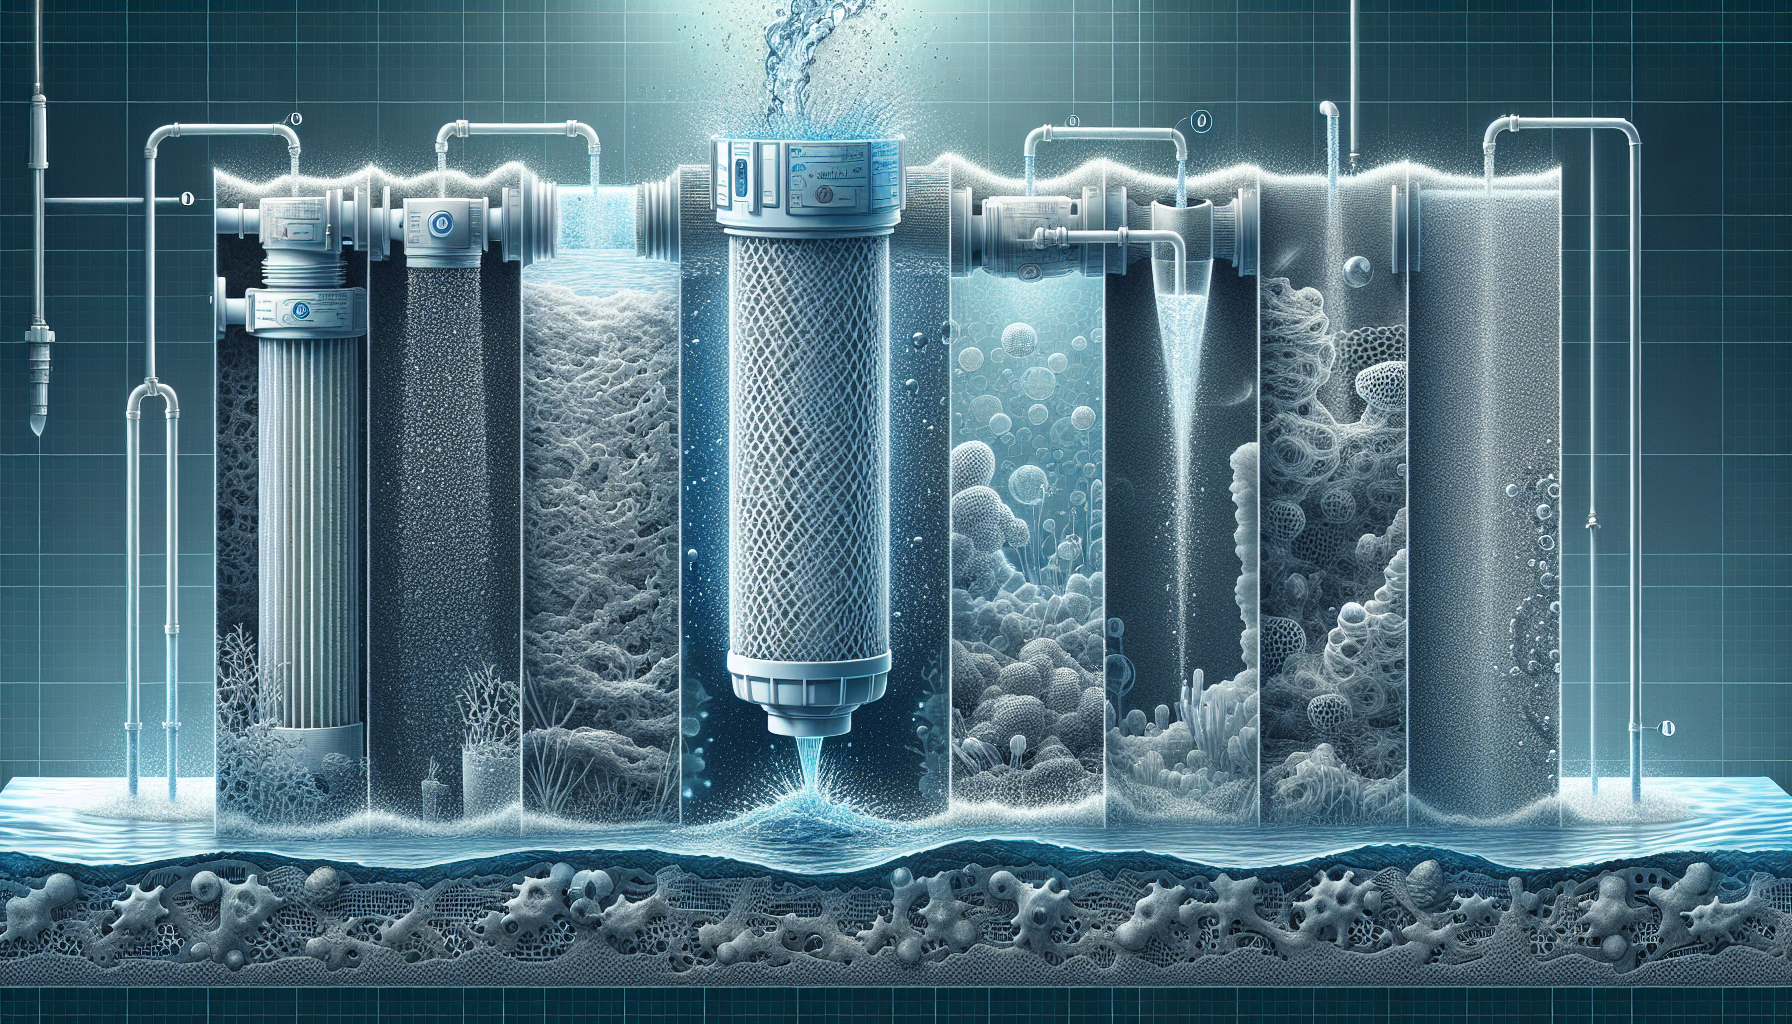 Illustration of the fine filtration membrane and multiple filtration stages in Puretec RO systems